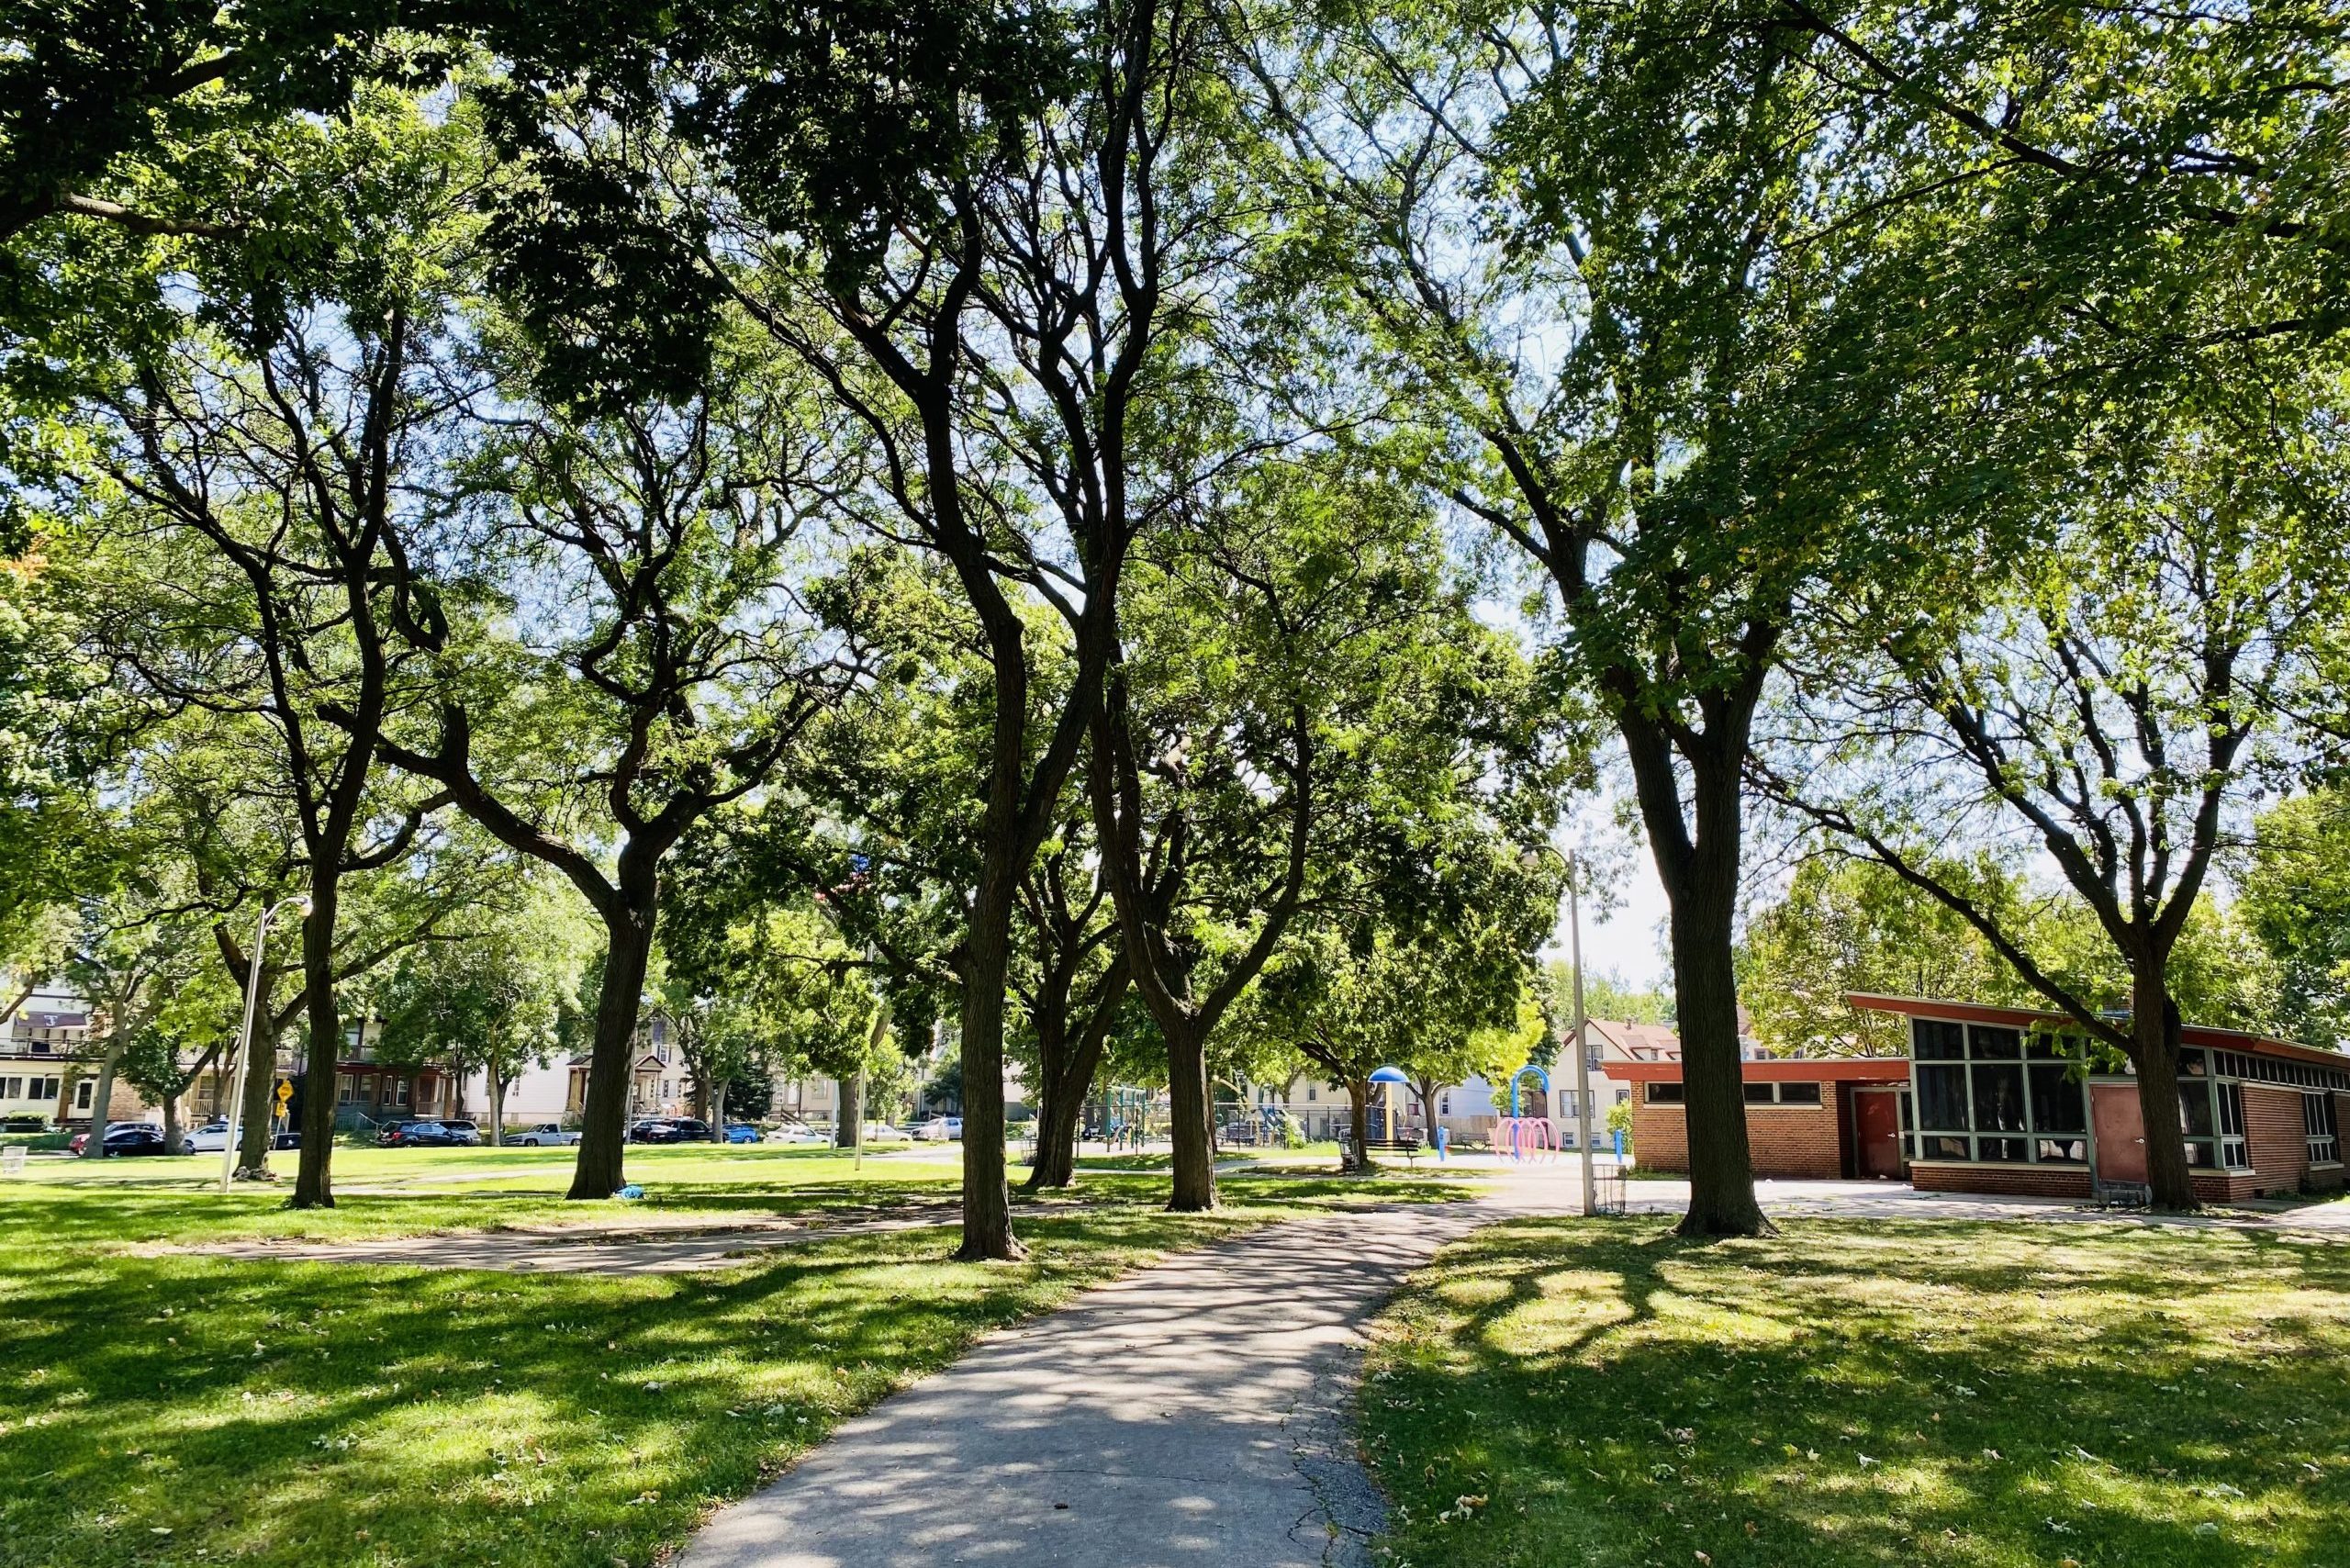 tree-lined path with park center and playground in the background